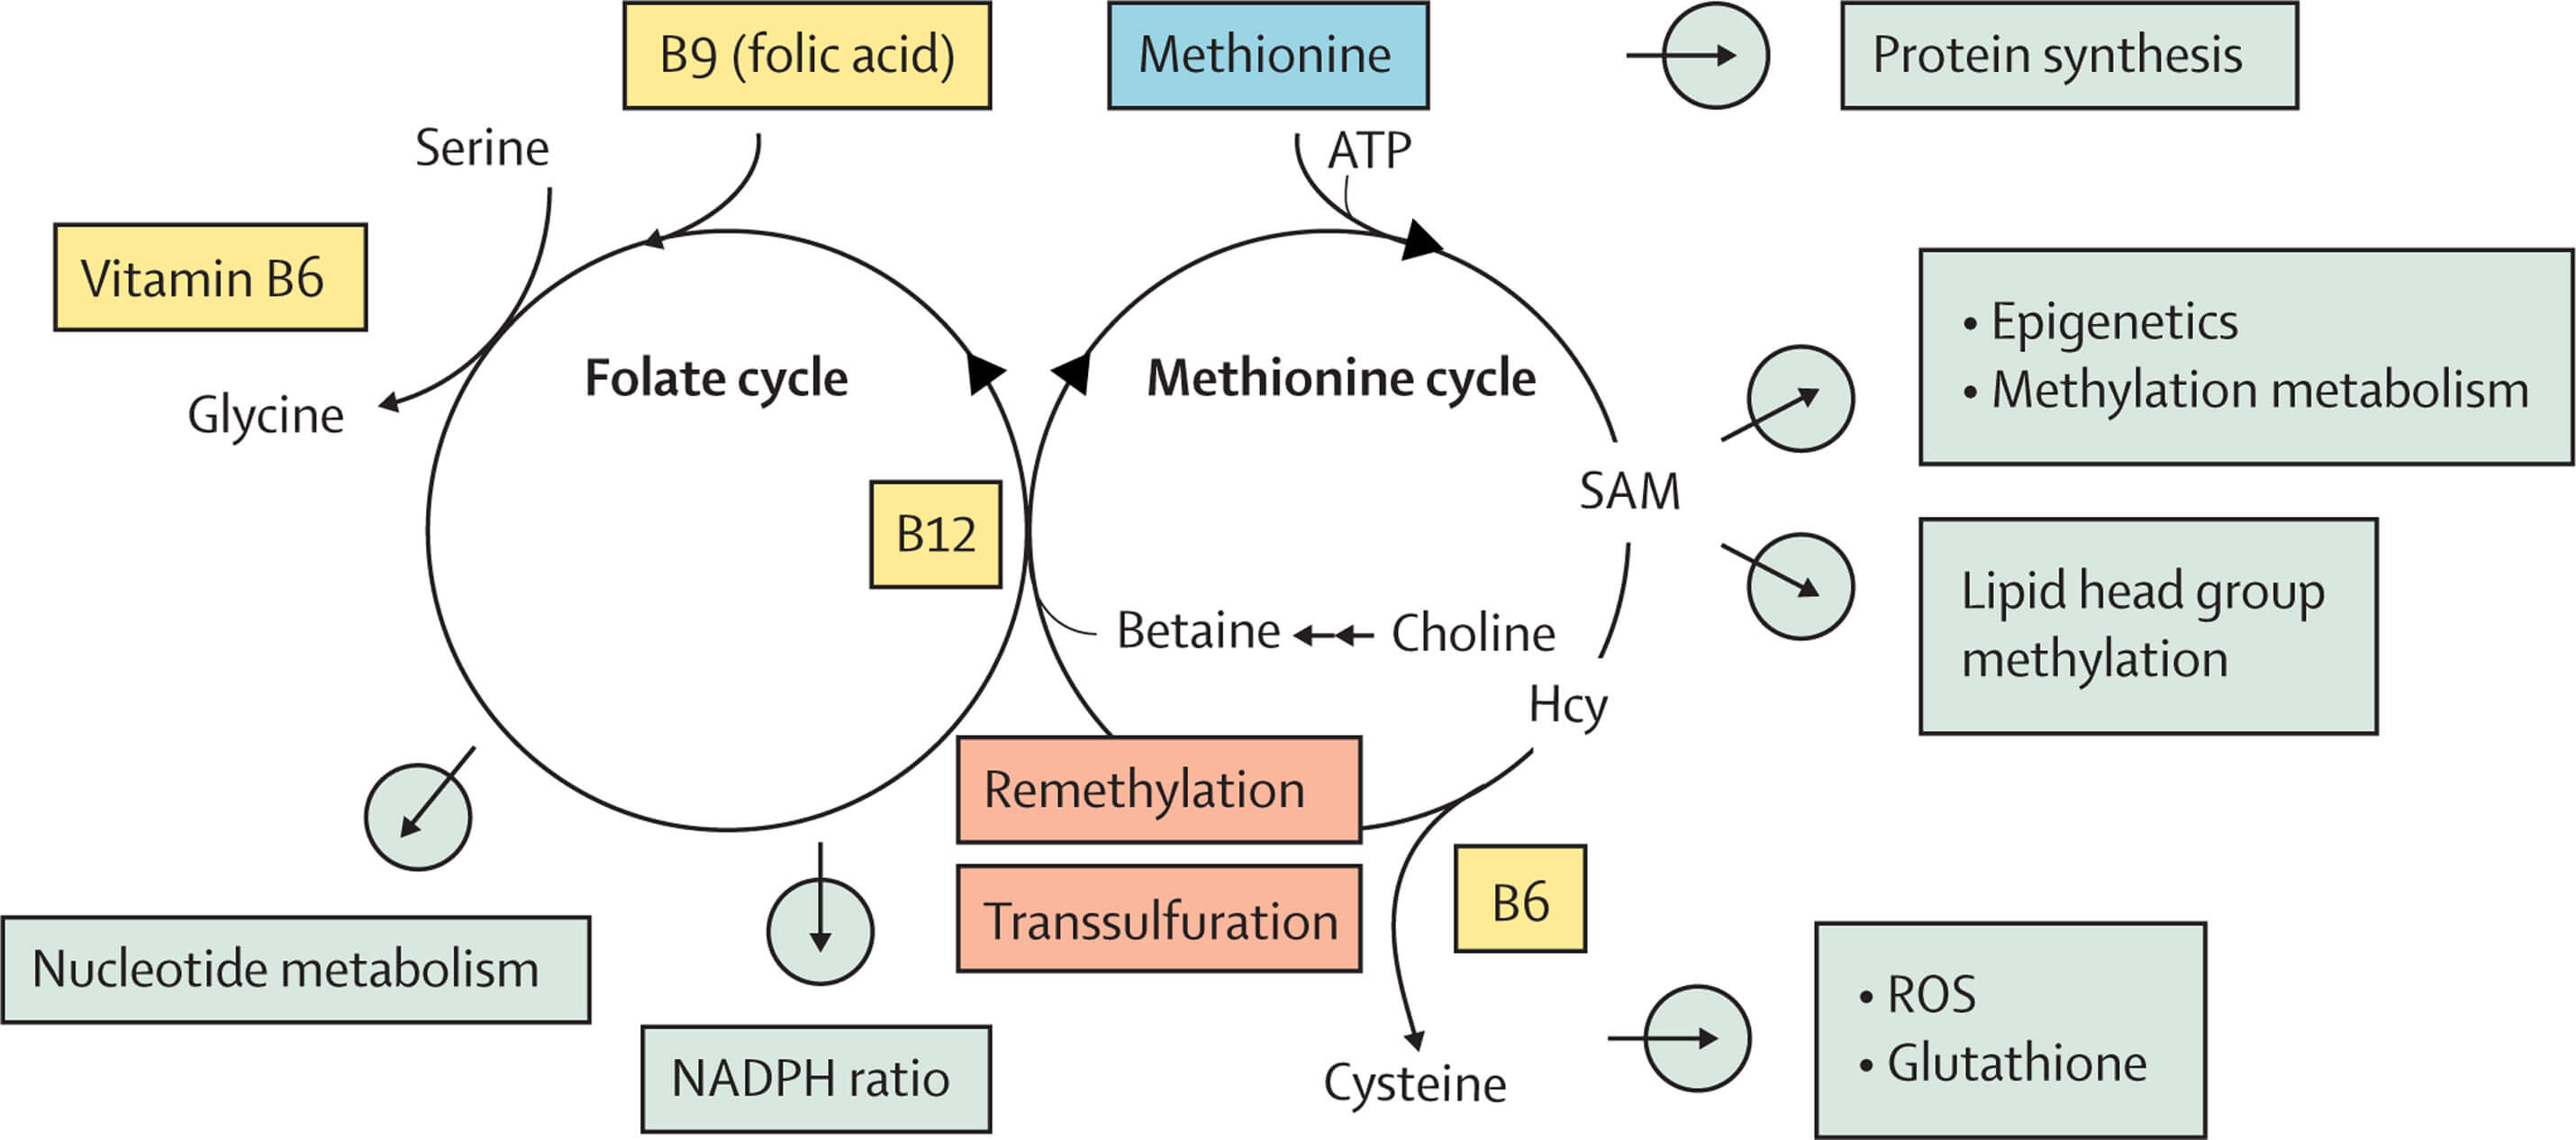 Circular flow chart diagram of the one-carbon metabolism showing the folate and methionine cycle